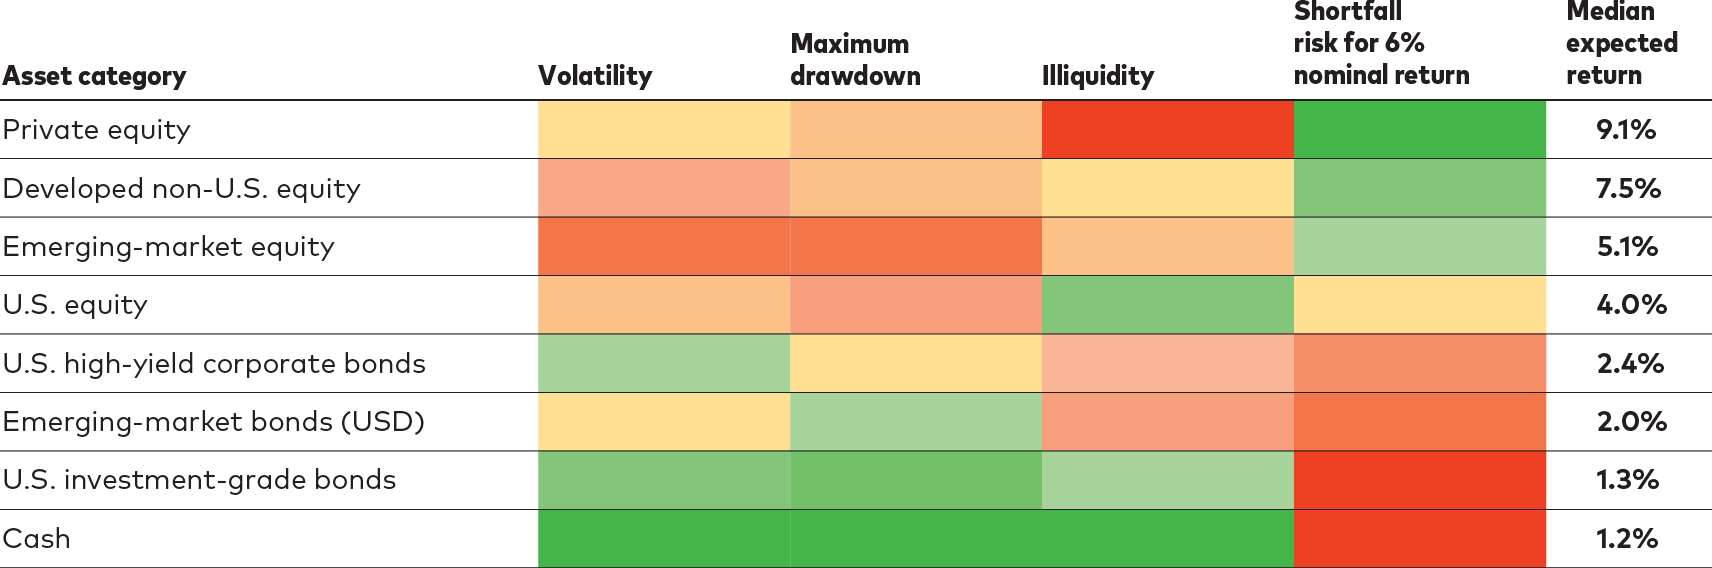 The image is a "heat map" gauging the levels of risk for eight asset categories relative to other asset class categories, from green or low risk to red or high risk with gradations in between. The asset categories are private equity, developed non-U.S. equity, emerging market equity, U.S. equity, U.S. high-yield corporate bonds, emerging market bonds in U.S. dollars, U.S. investment-grade bonds, and cash. The risks used in the comparison are volatility, maximum drawdown, illiquidity, and shortfall risk for a 6%